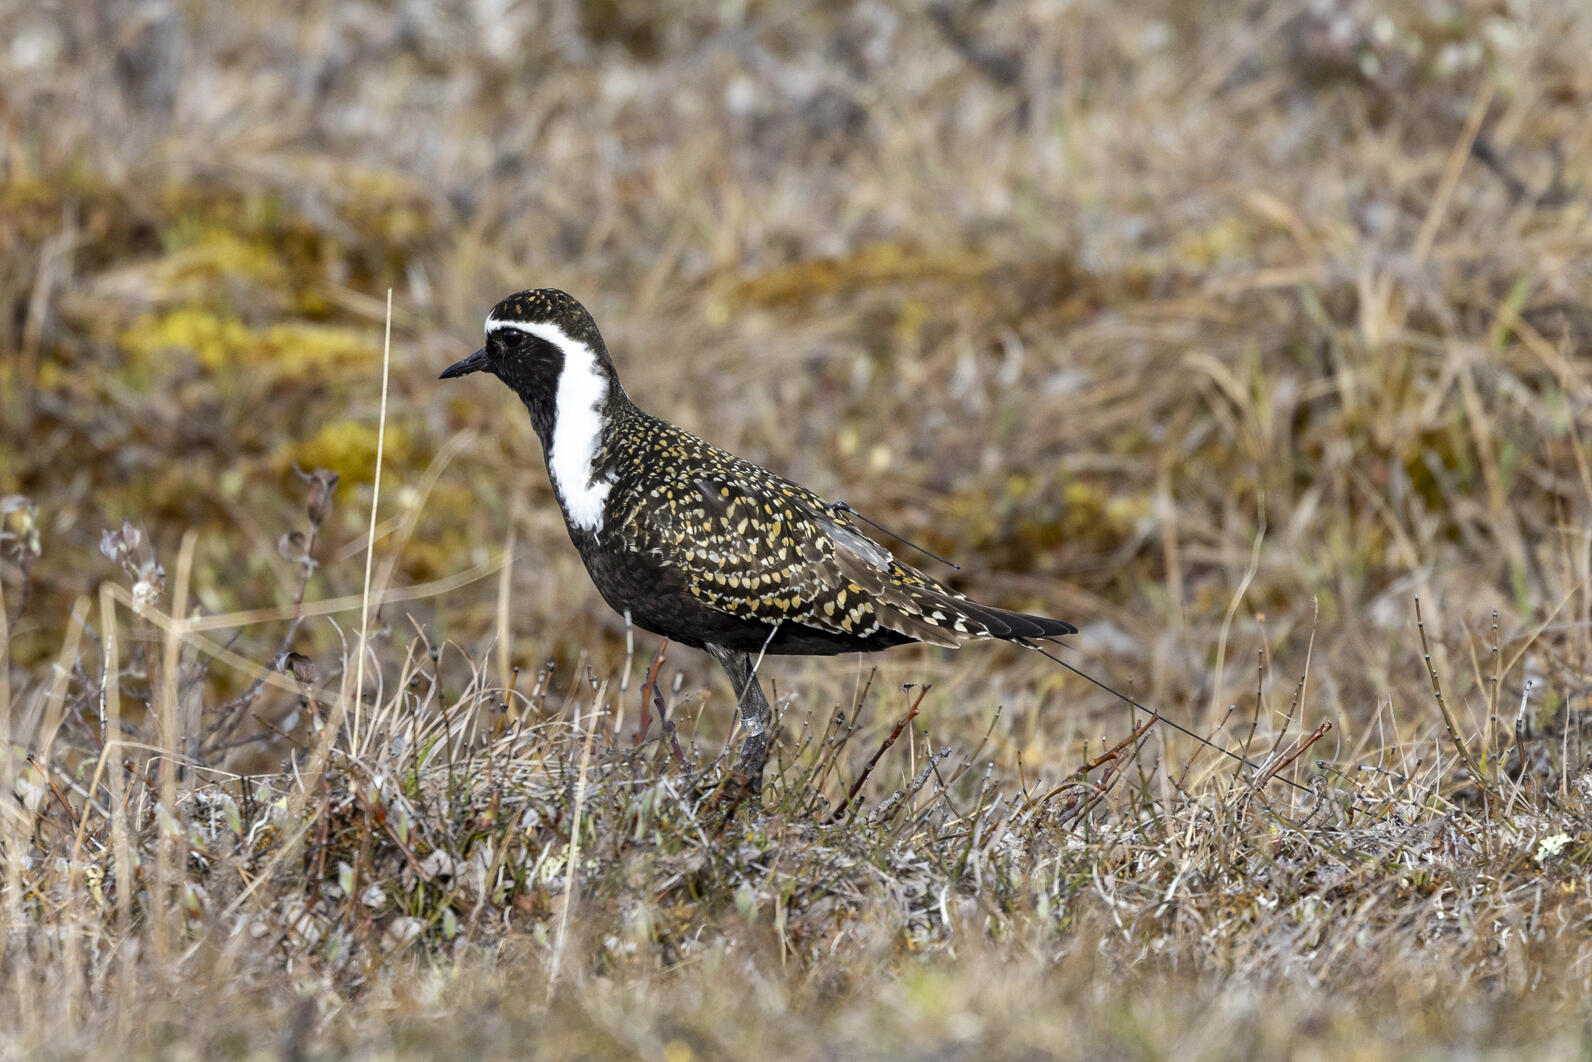 A marked American Golden-Plover (notice the antenna off the rump).